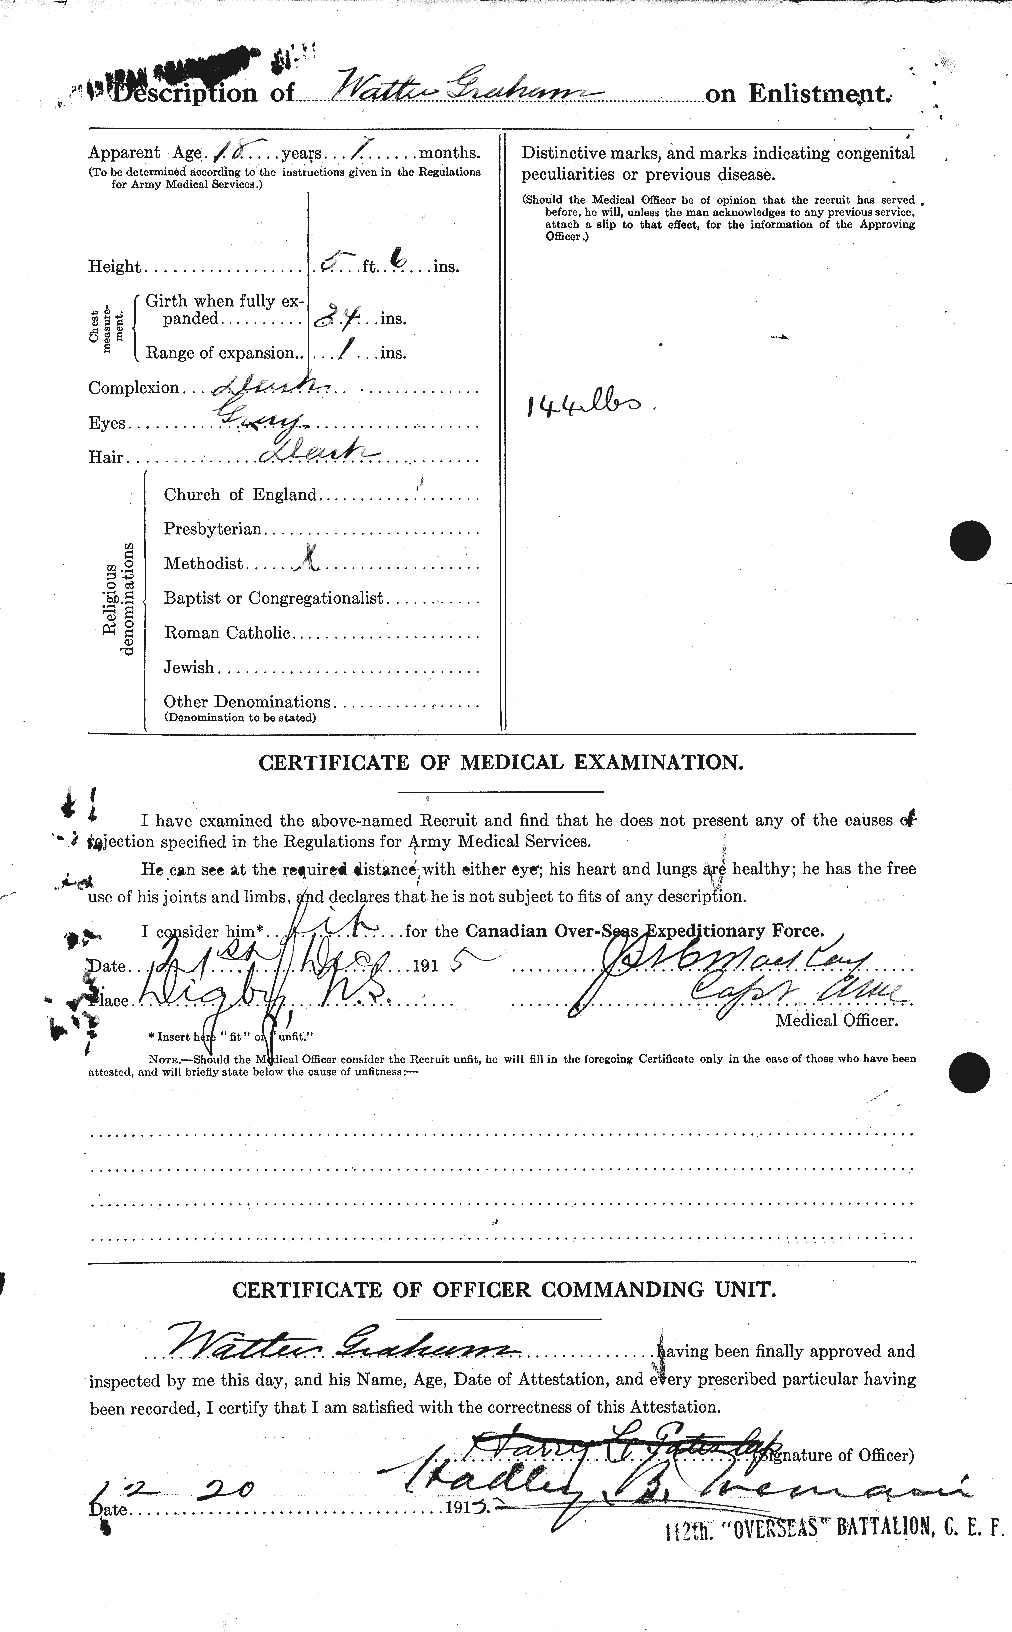 Personnel Records of the First World War - CEF 362650b